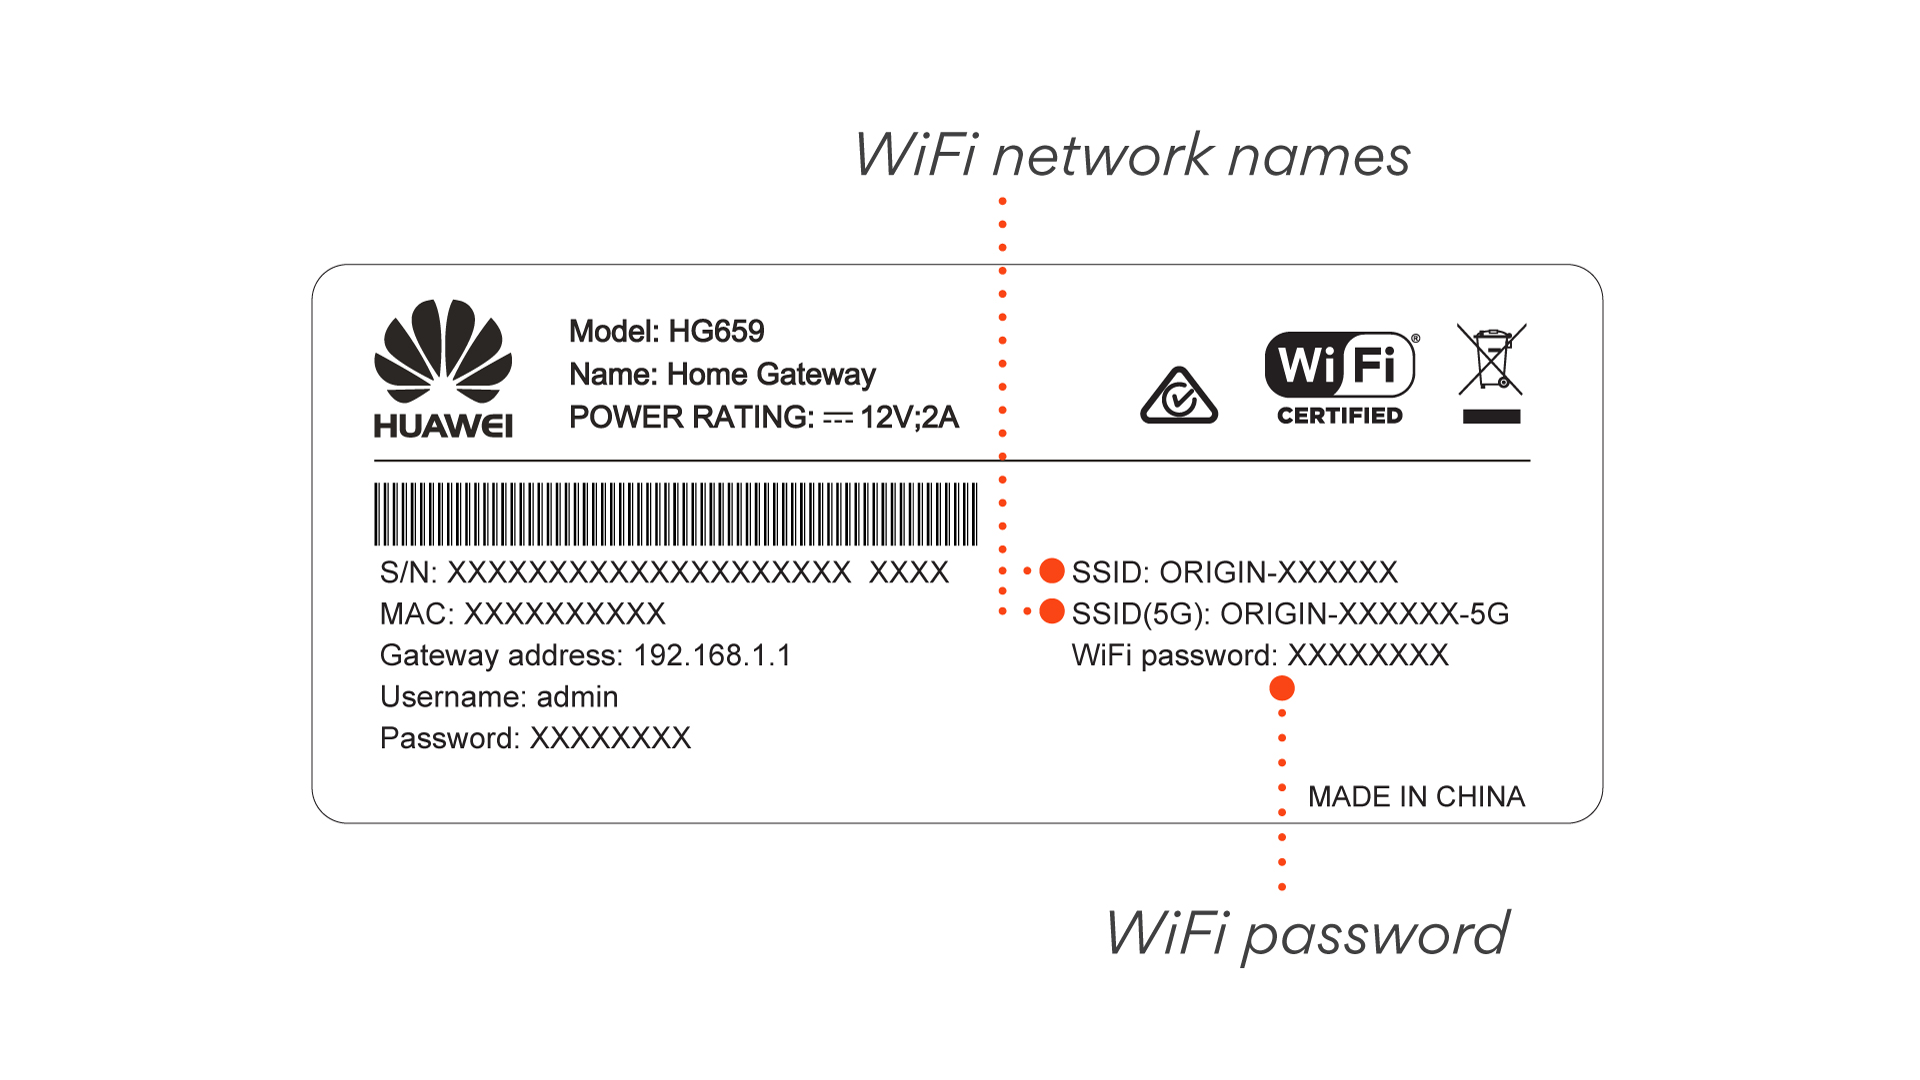 Wi-Fi network name and password on back of modem